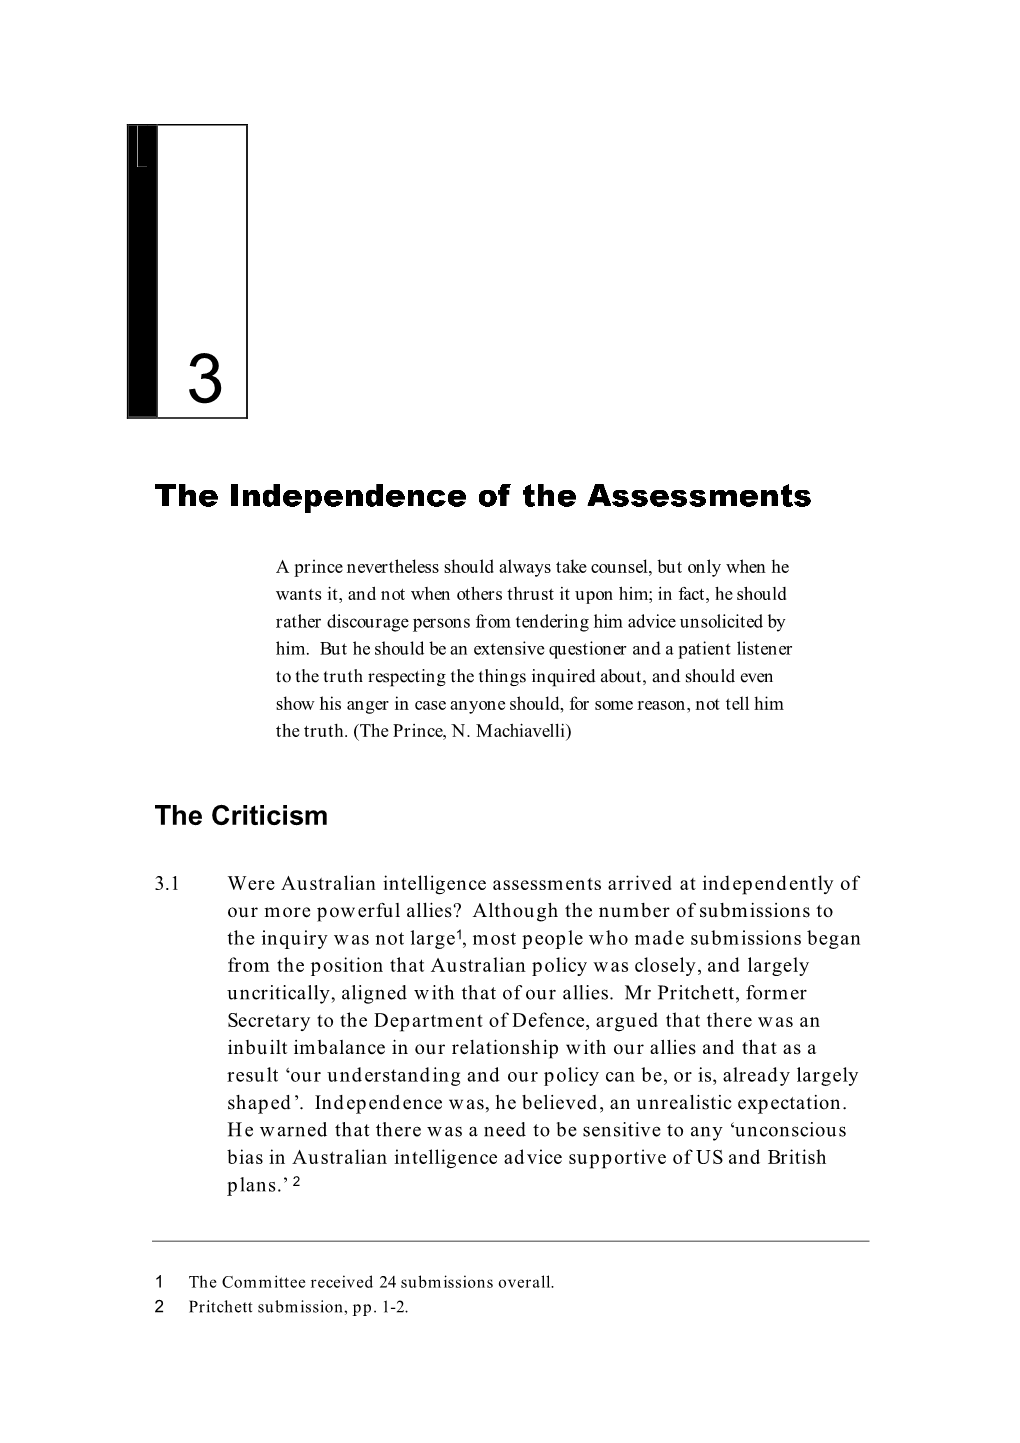 Chapter 3: the Independence of the Assessments